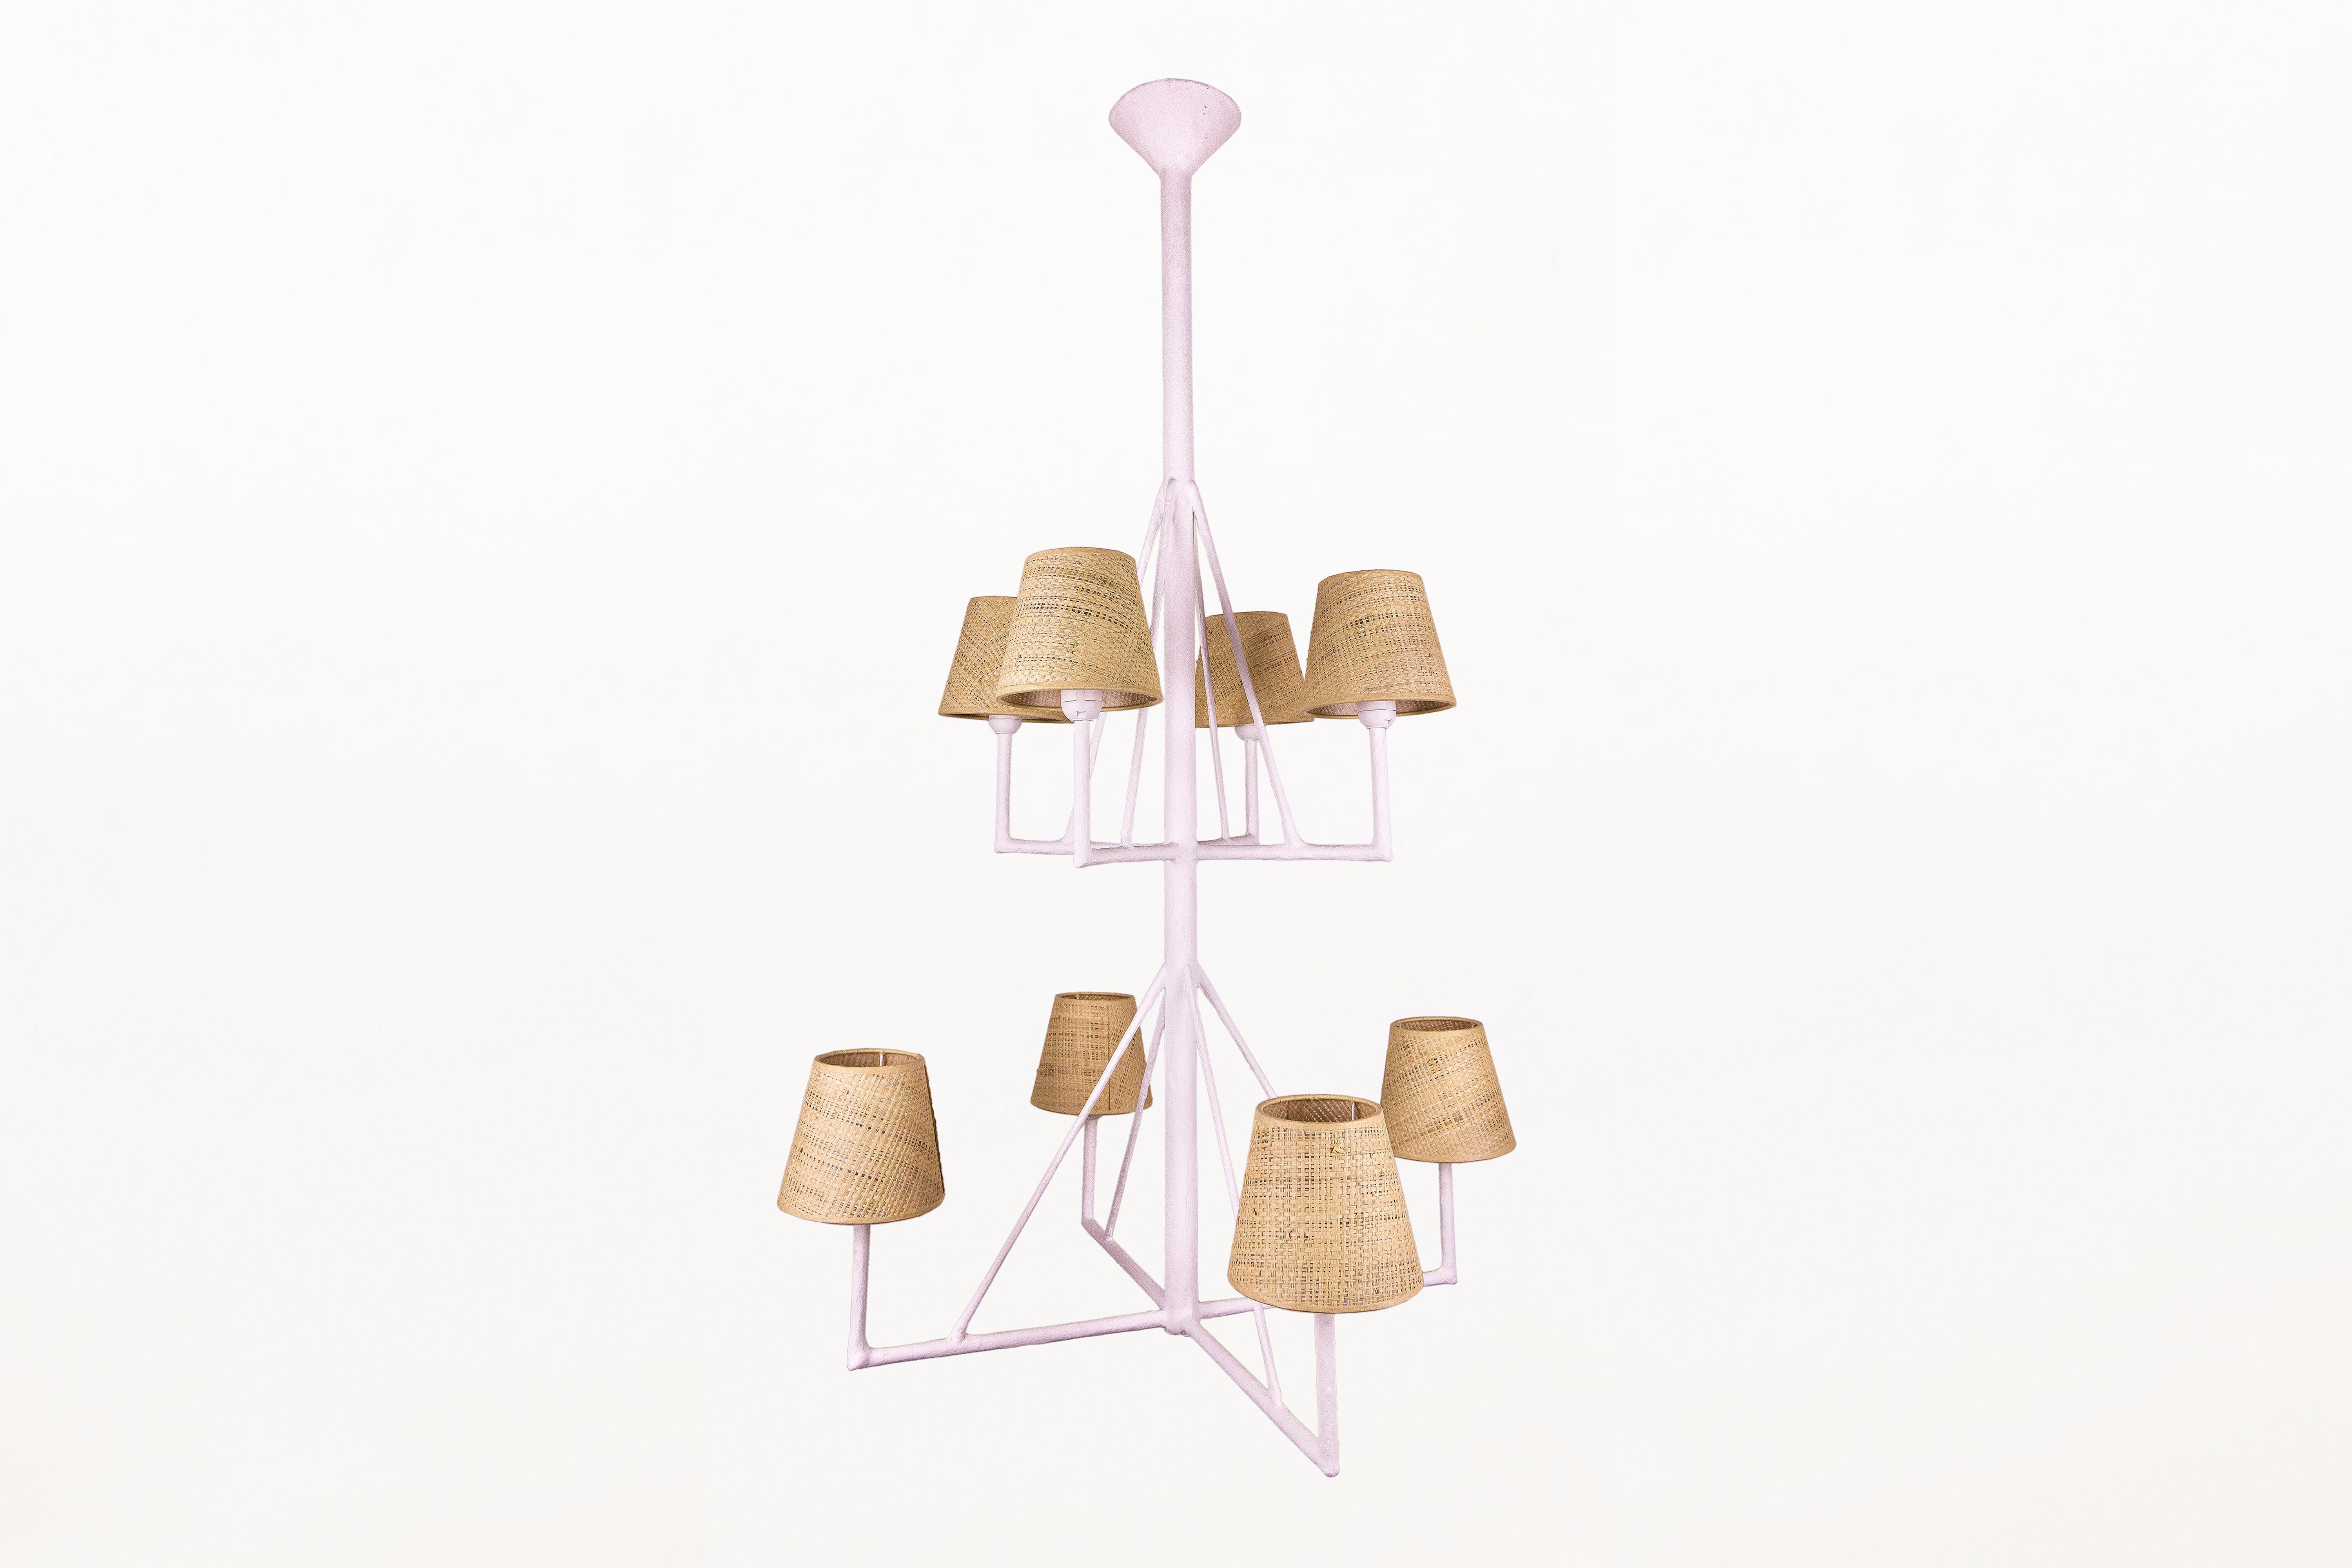 Summer chandelier by Serge Castella
Plaster and iron construction
8-light
Signed
Contemporary sesign
Made to order
Customizing possible.
This Serge Castella design complements Castella's other plaster chandelier: 